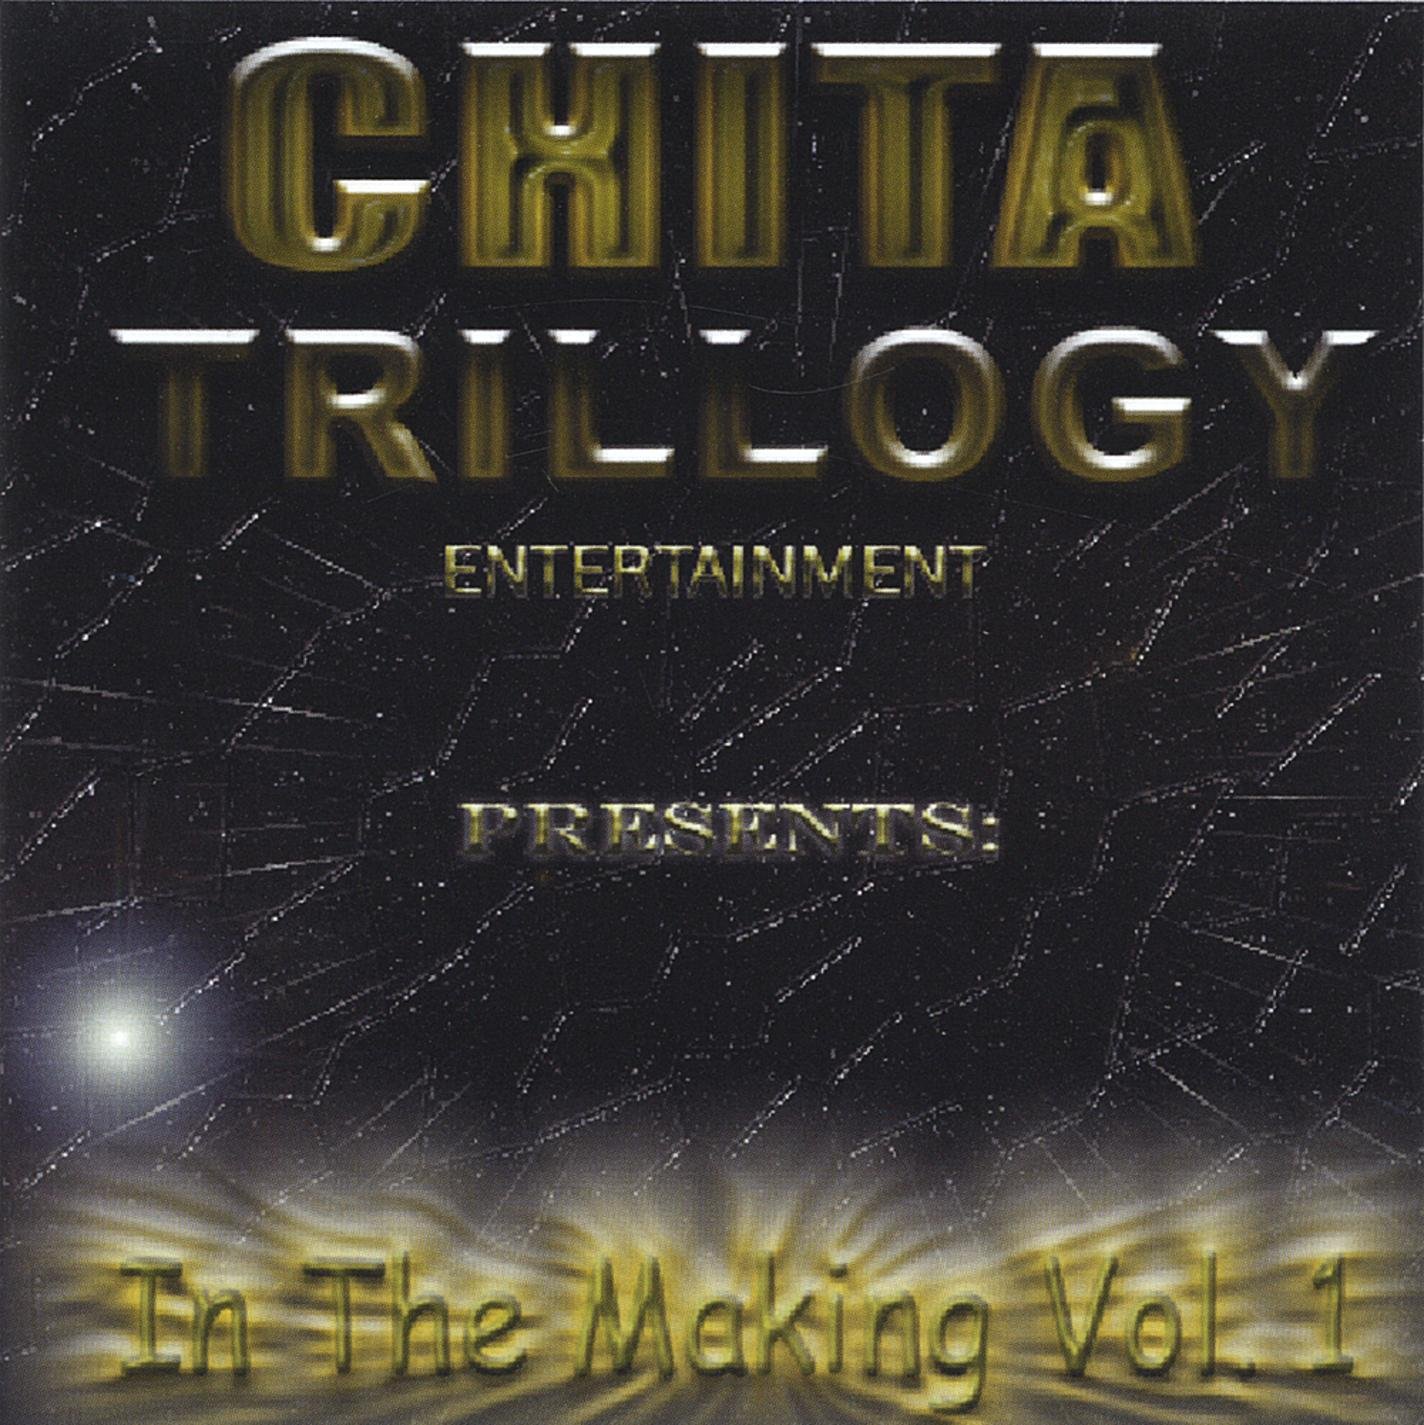 Chita Trillogy Entertainment Presents - In The Making Vol. 1 (2004) FLAC Download